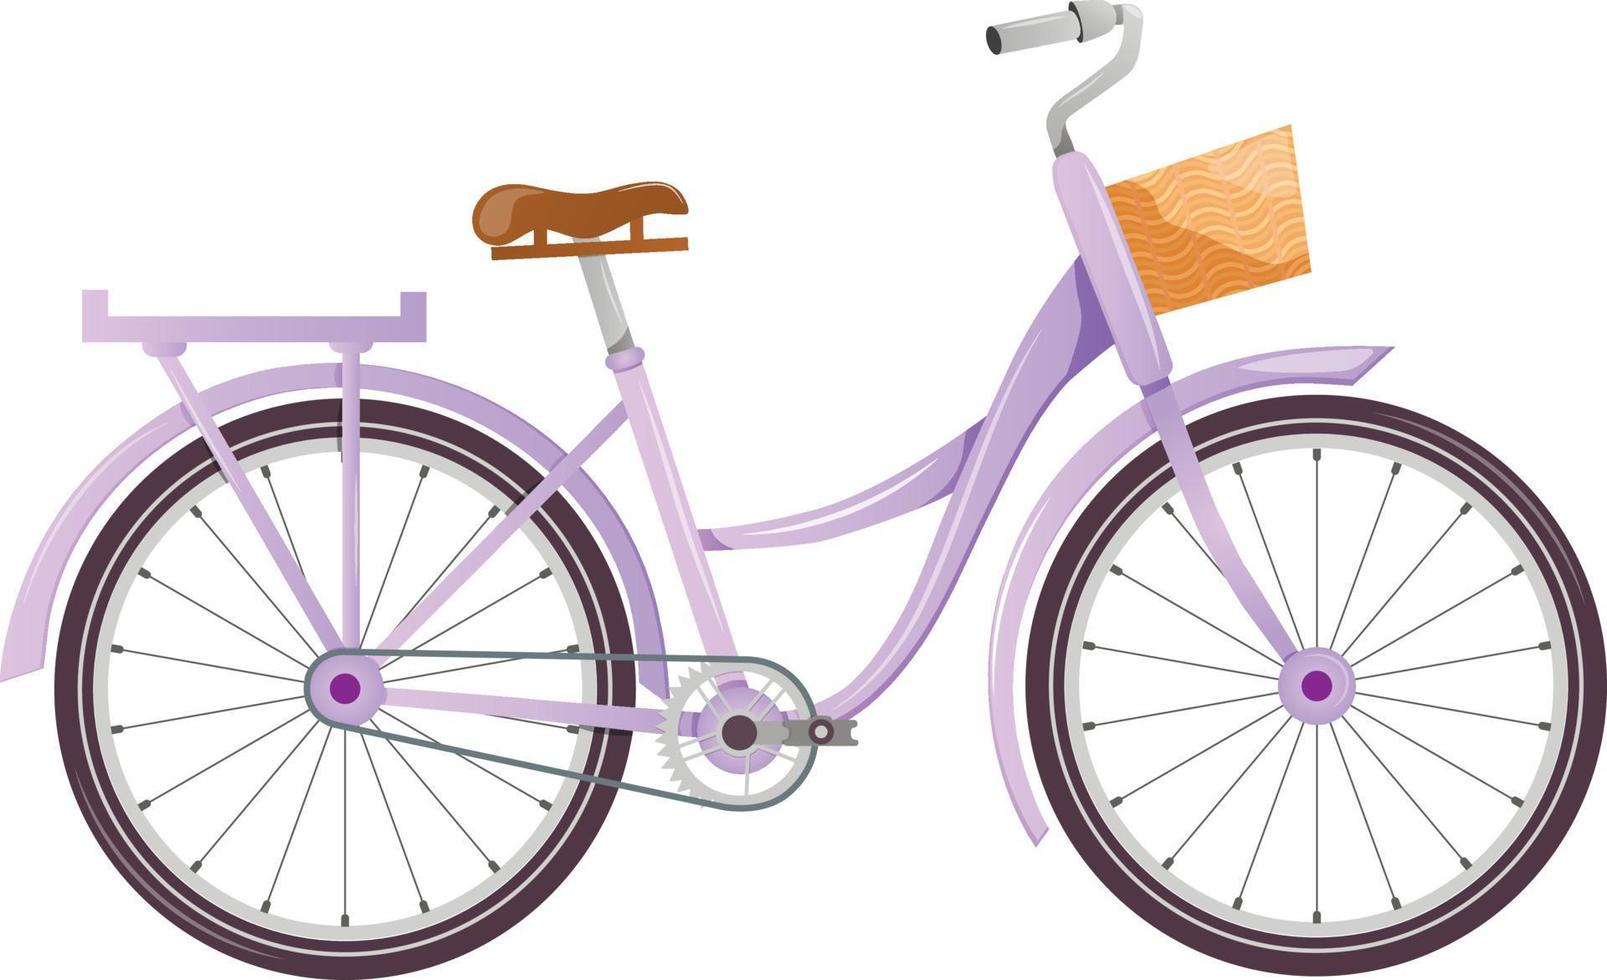 Cute cartoon purple bicycle with a basket in front vector illustration